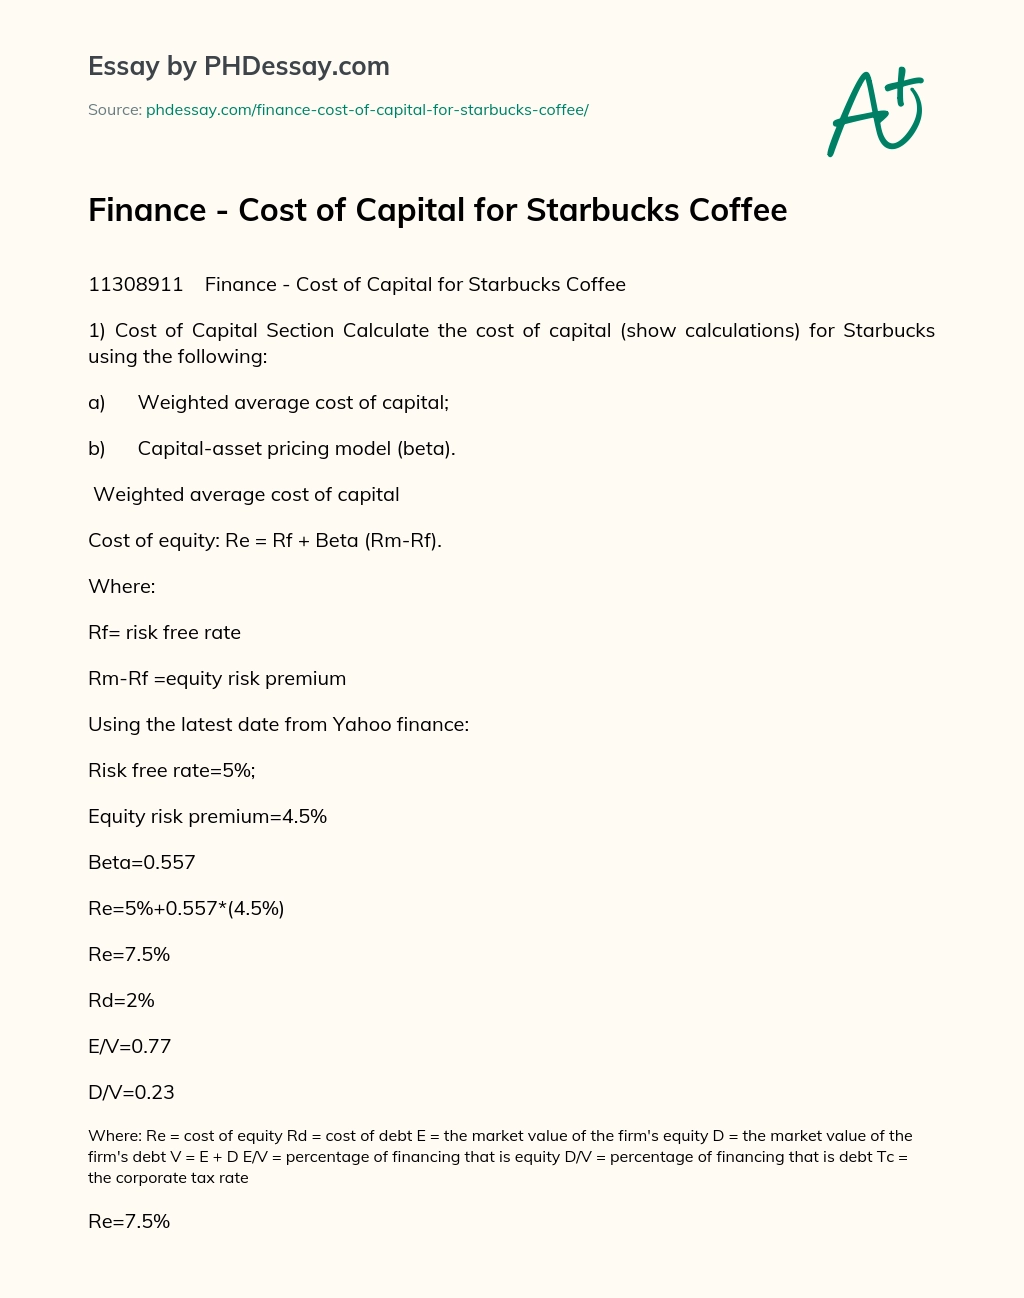 Finance – Cost of Capital for Starbucks Coffee essay